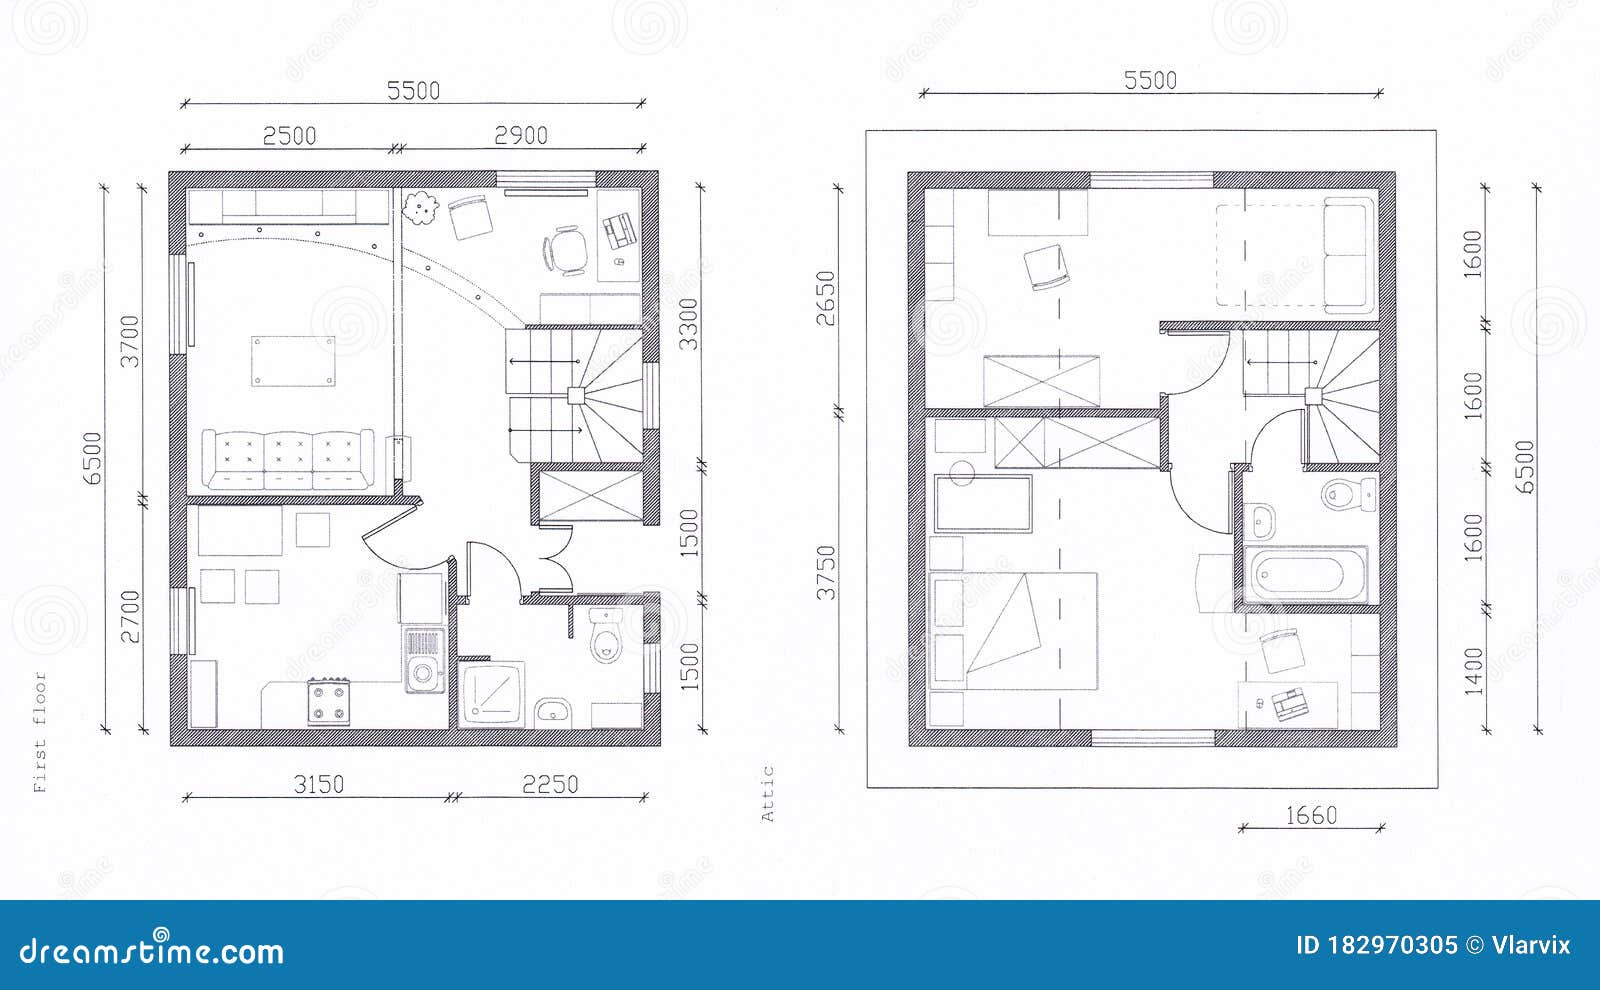 House Floor Plans With Dimensions - On some house plans dimensions may